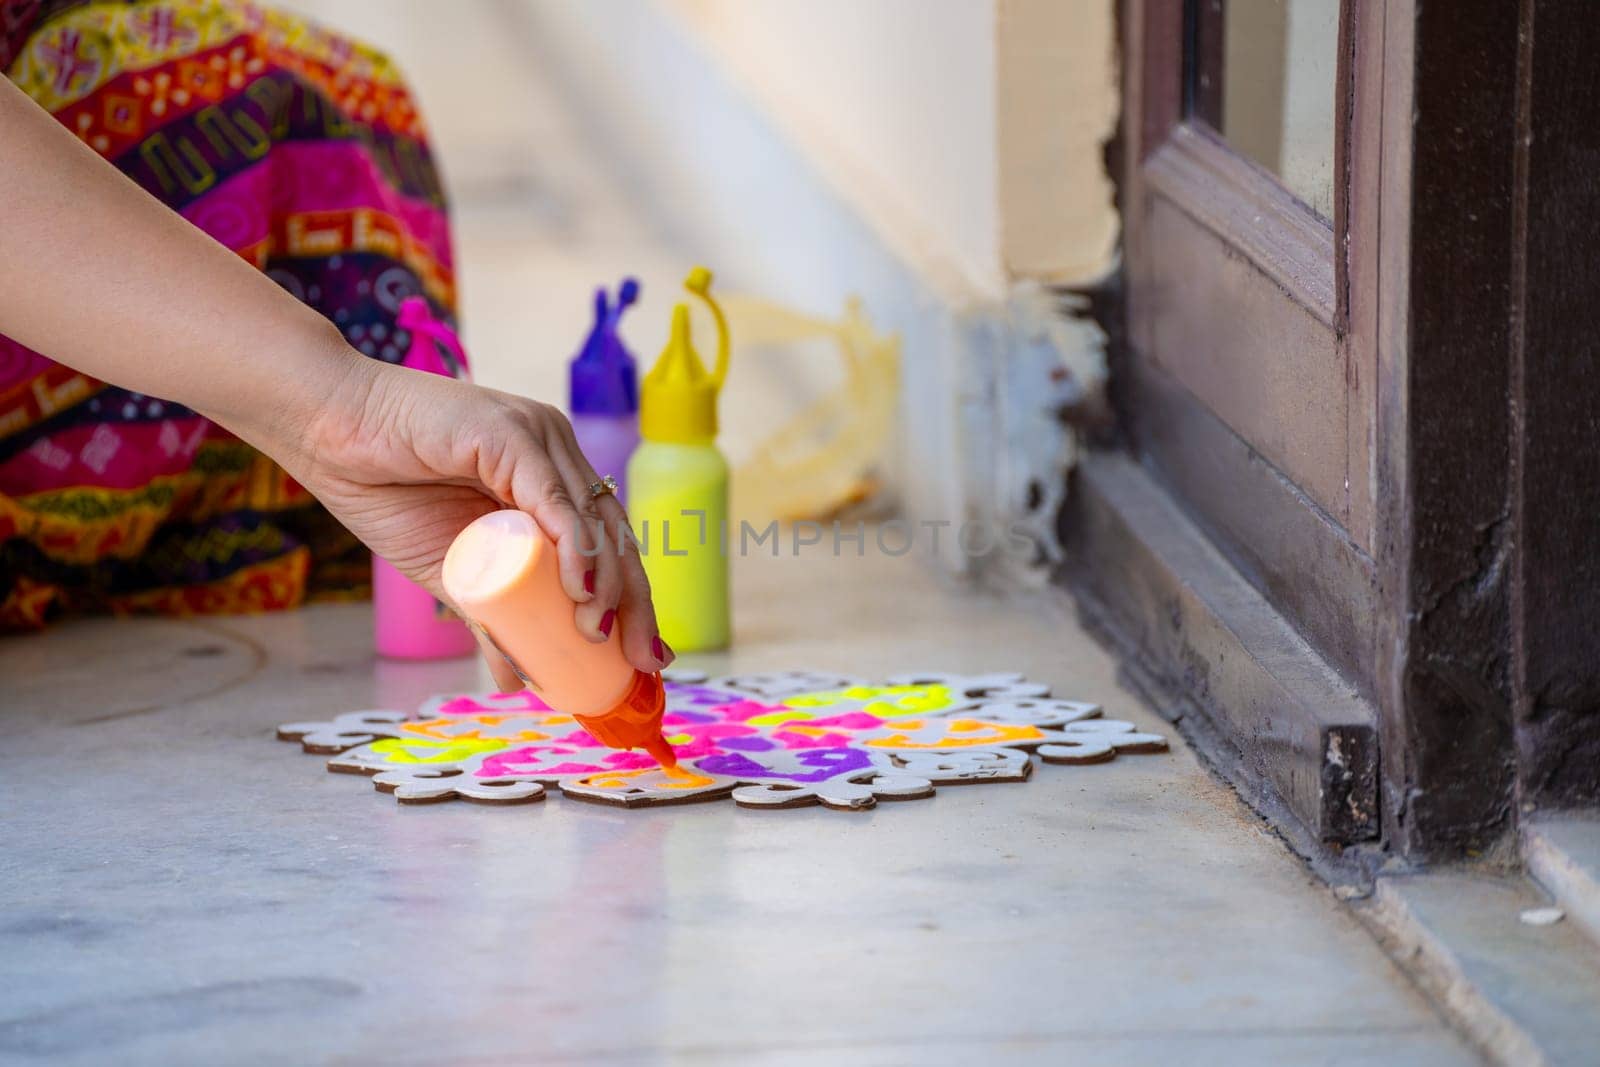 Indian woman in traditional indian clothing using bottles of color powder to make rangoli a traditional art made on floors during festivals of diwali, dussera, onam in hindu culture